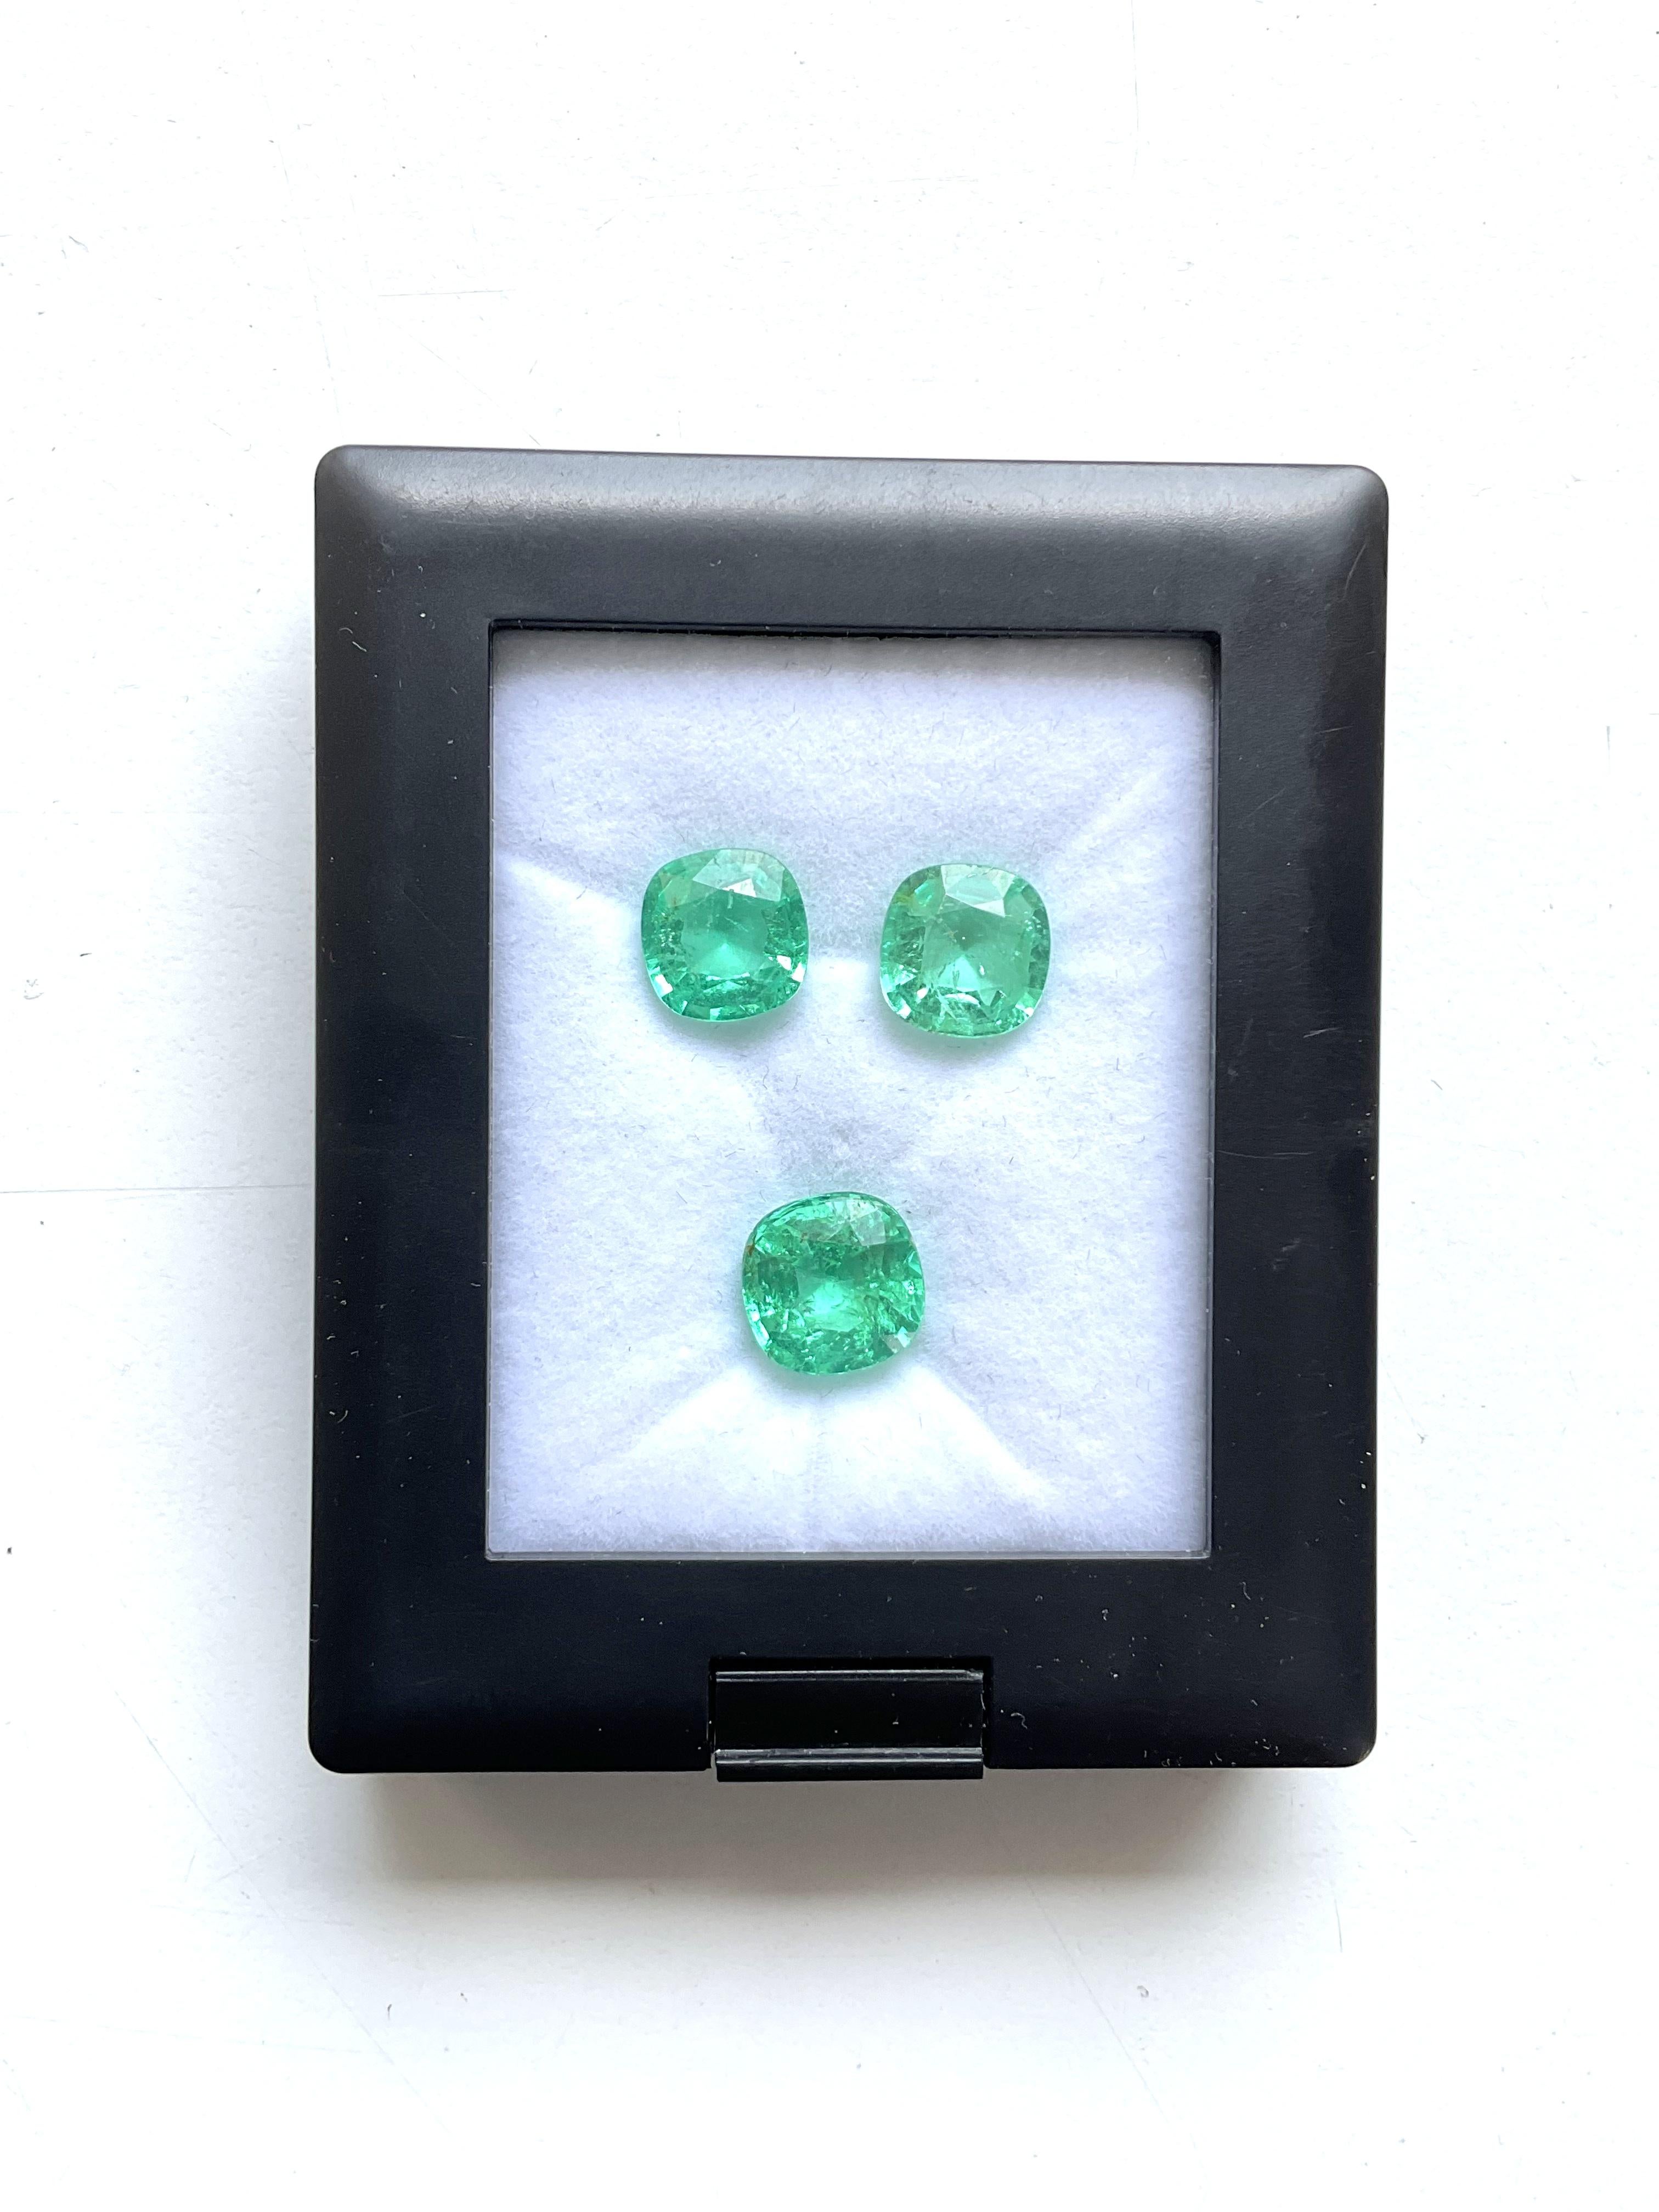 certified 10.35 carats colombian emerald 3 pieces cut stone set for jewelry gem

Gemstone - Emerald 
Weight - 10.35 carats
Shape - cushion
Size - 10x10x7 To 10x10x5 MM 
Quantity - 3 pieces                                                             